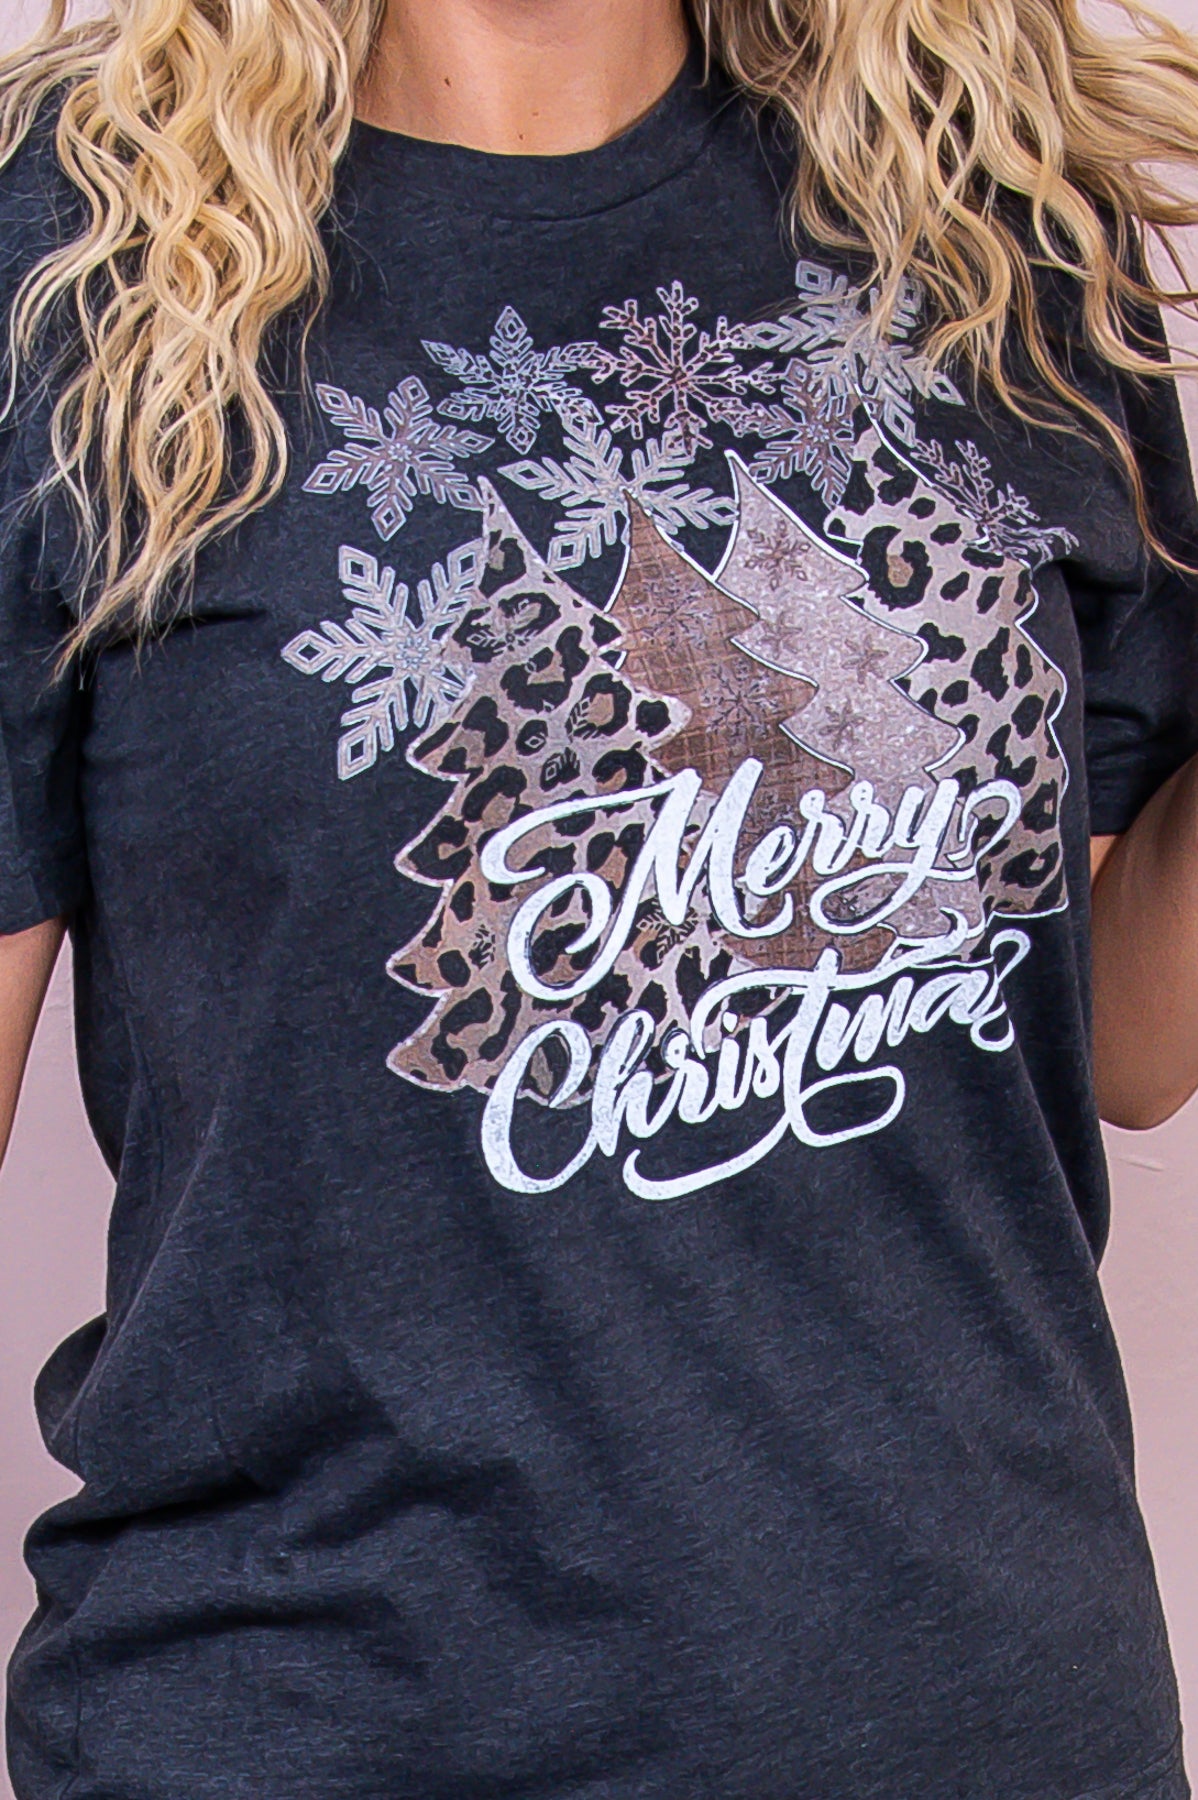 Merry Christmas Dark Heather Gray Graphic Tee - A3061DHG